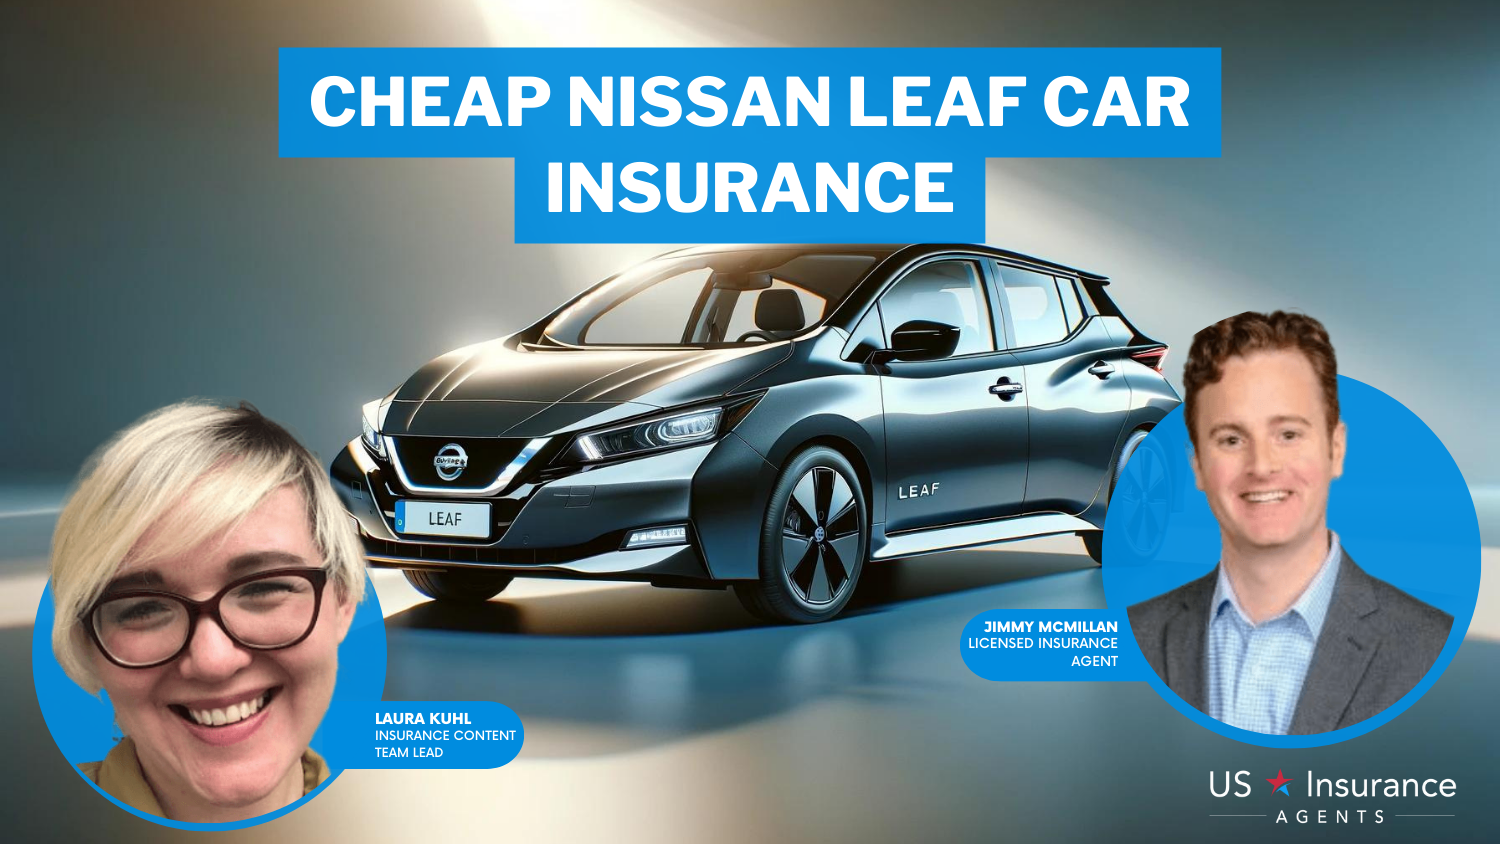 Cheap Nissan LEAF Car Insurance: Nationwide, State Farm, and Allstate